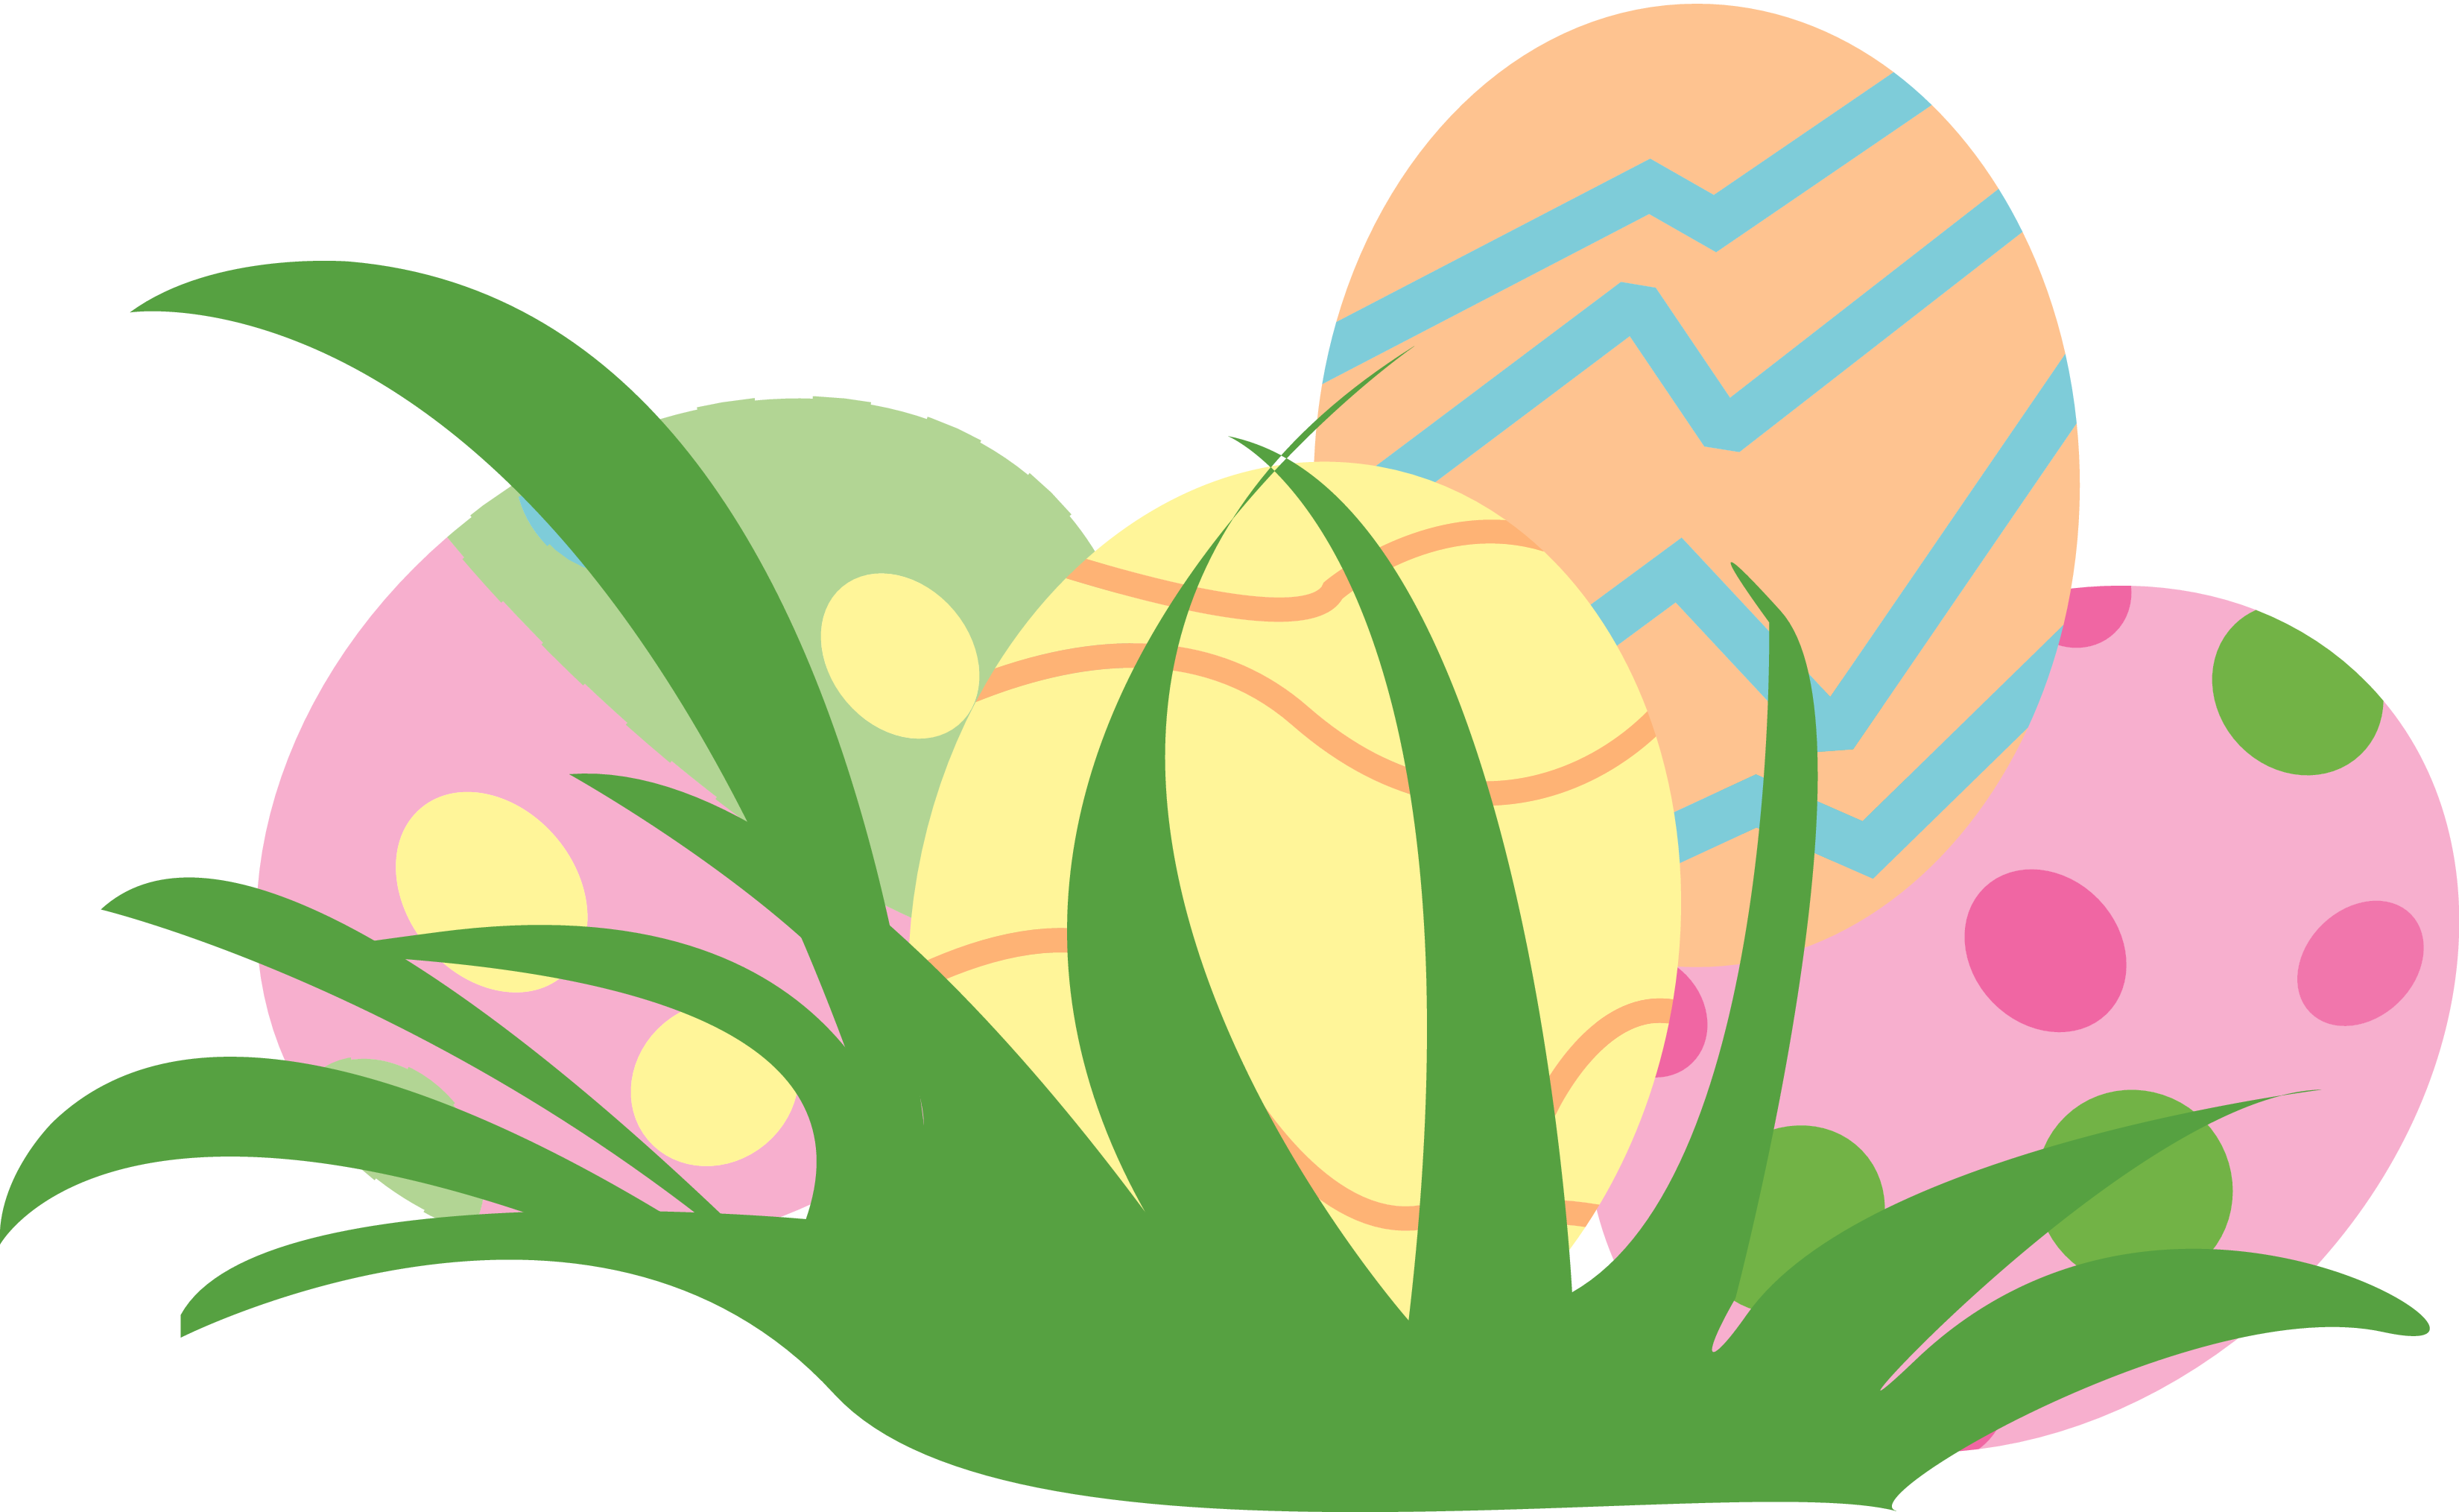 Free Egg Of Easter Egg Image Png Clipart